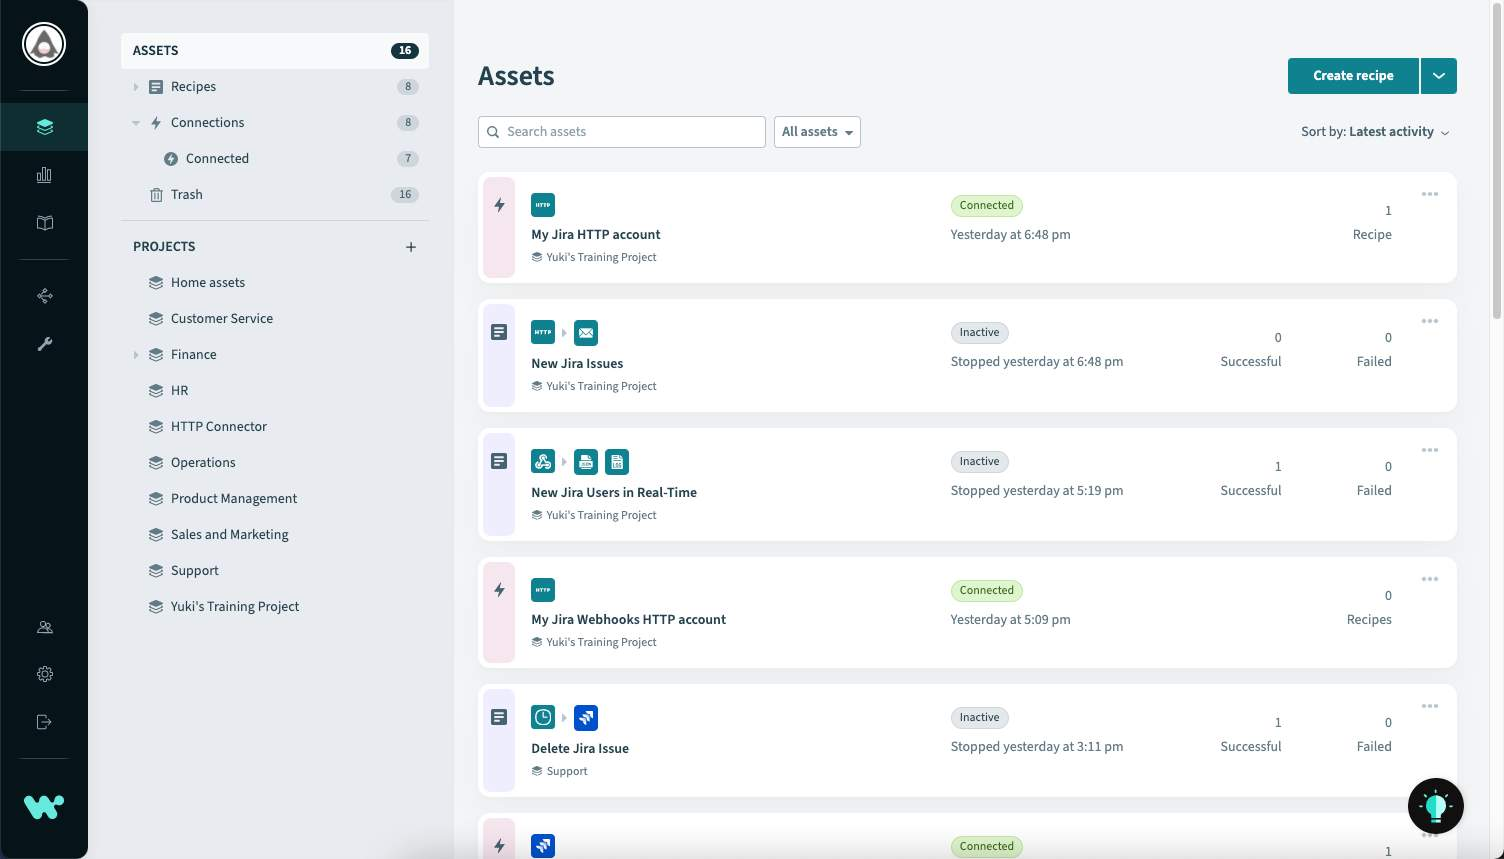 The Workato project UI, showing a series of projects and the detail of the assets for one